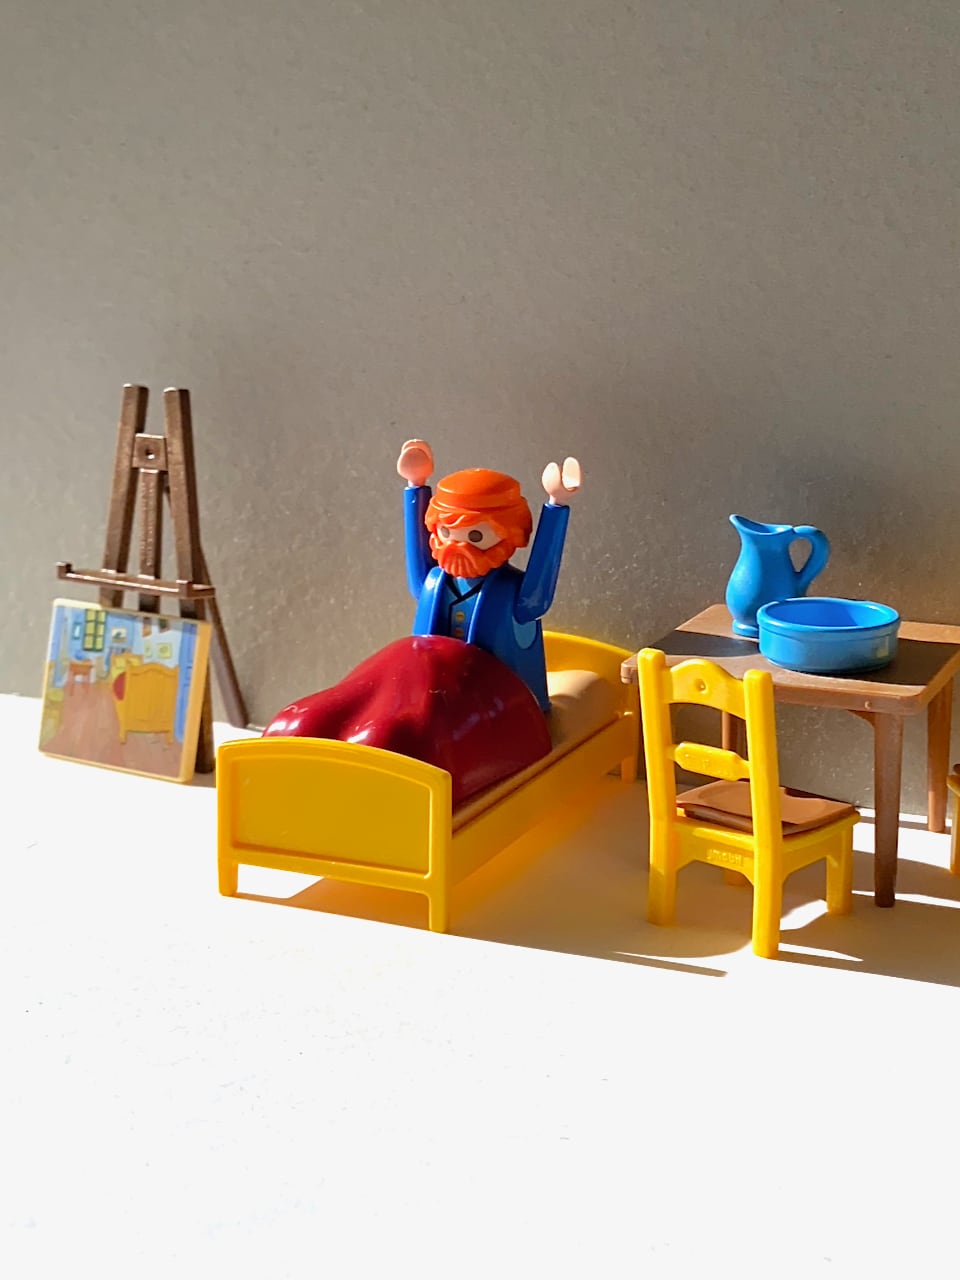 Van Gogh and The Bedroom as a Playmobil 70687 set